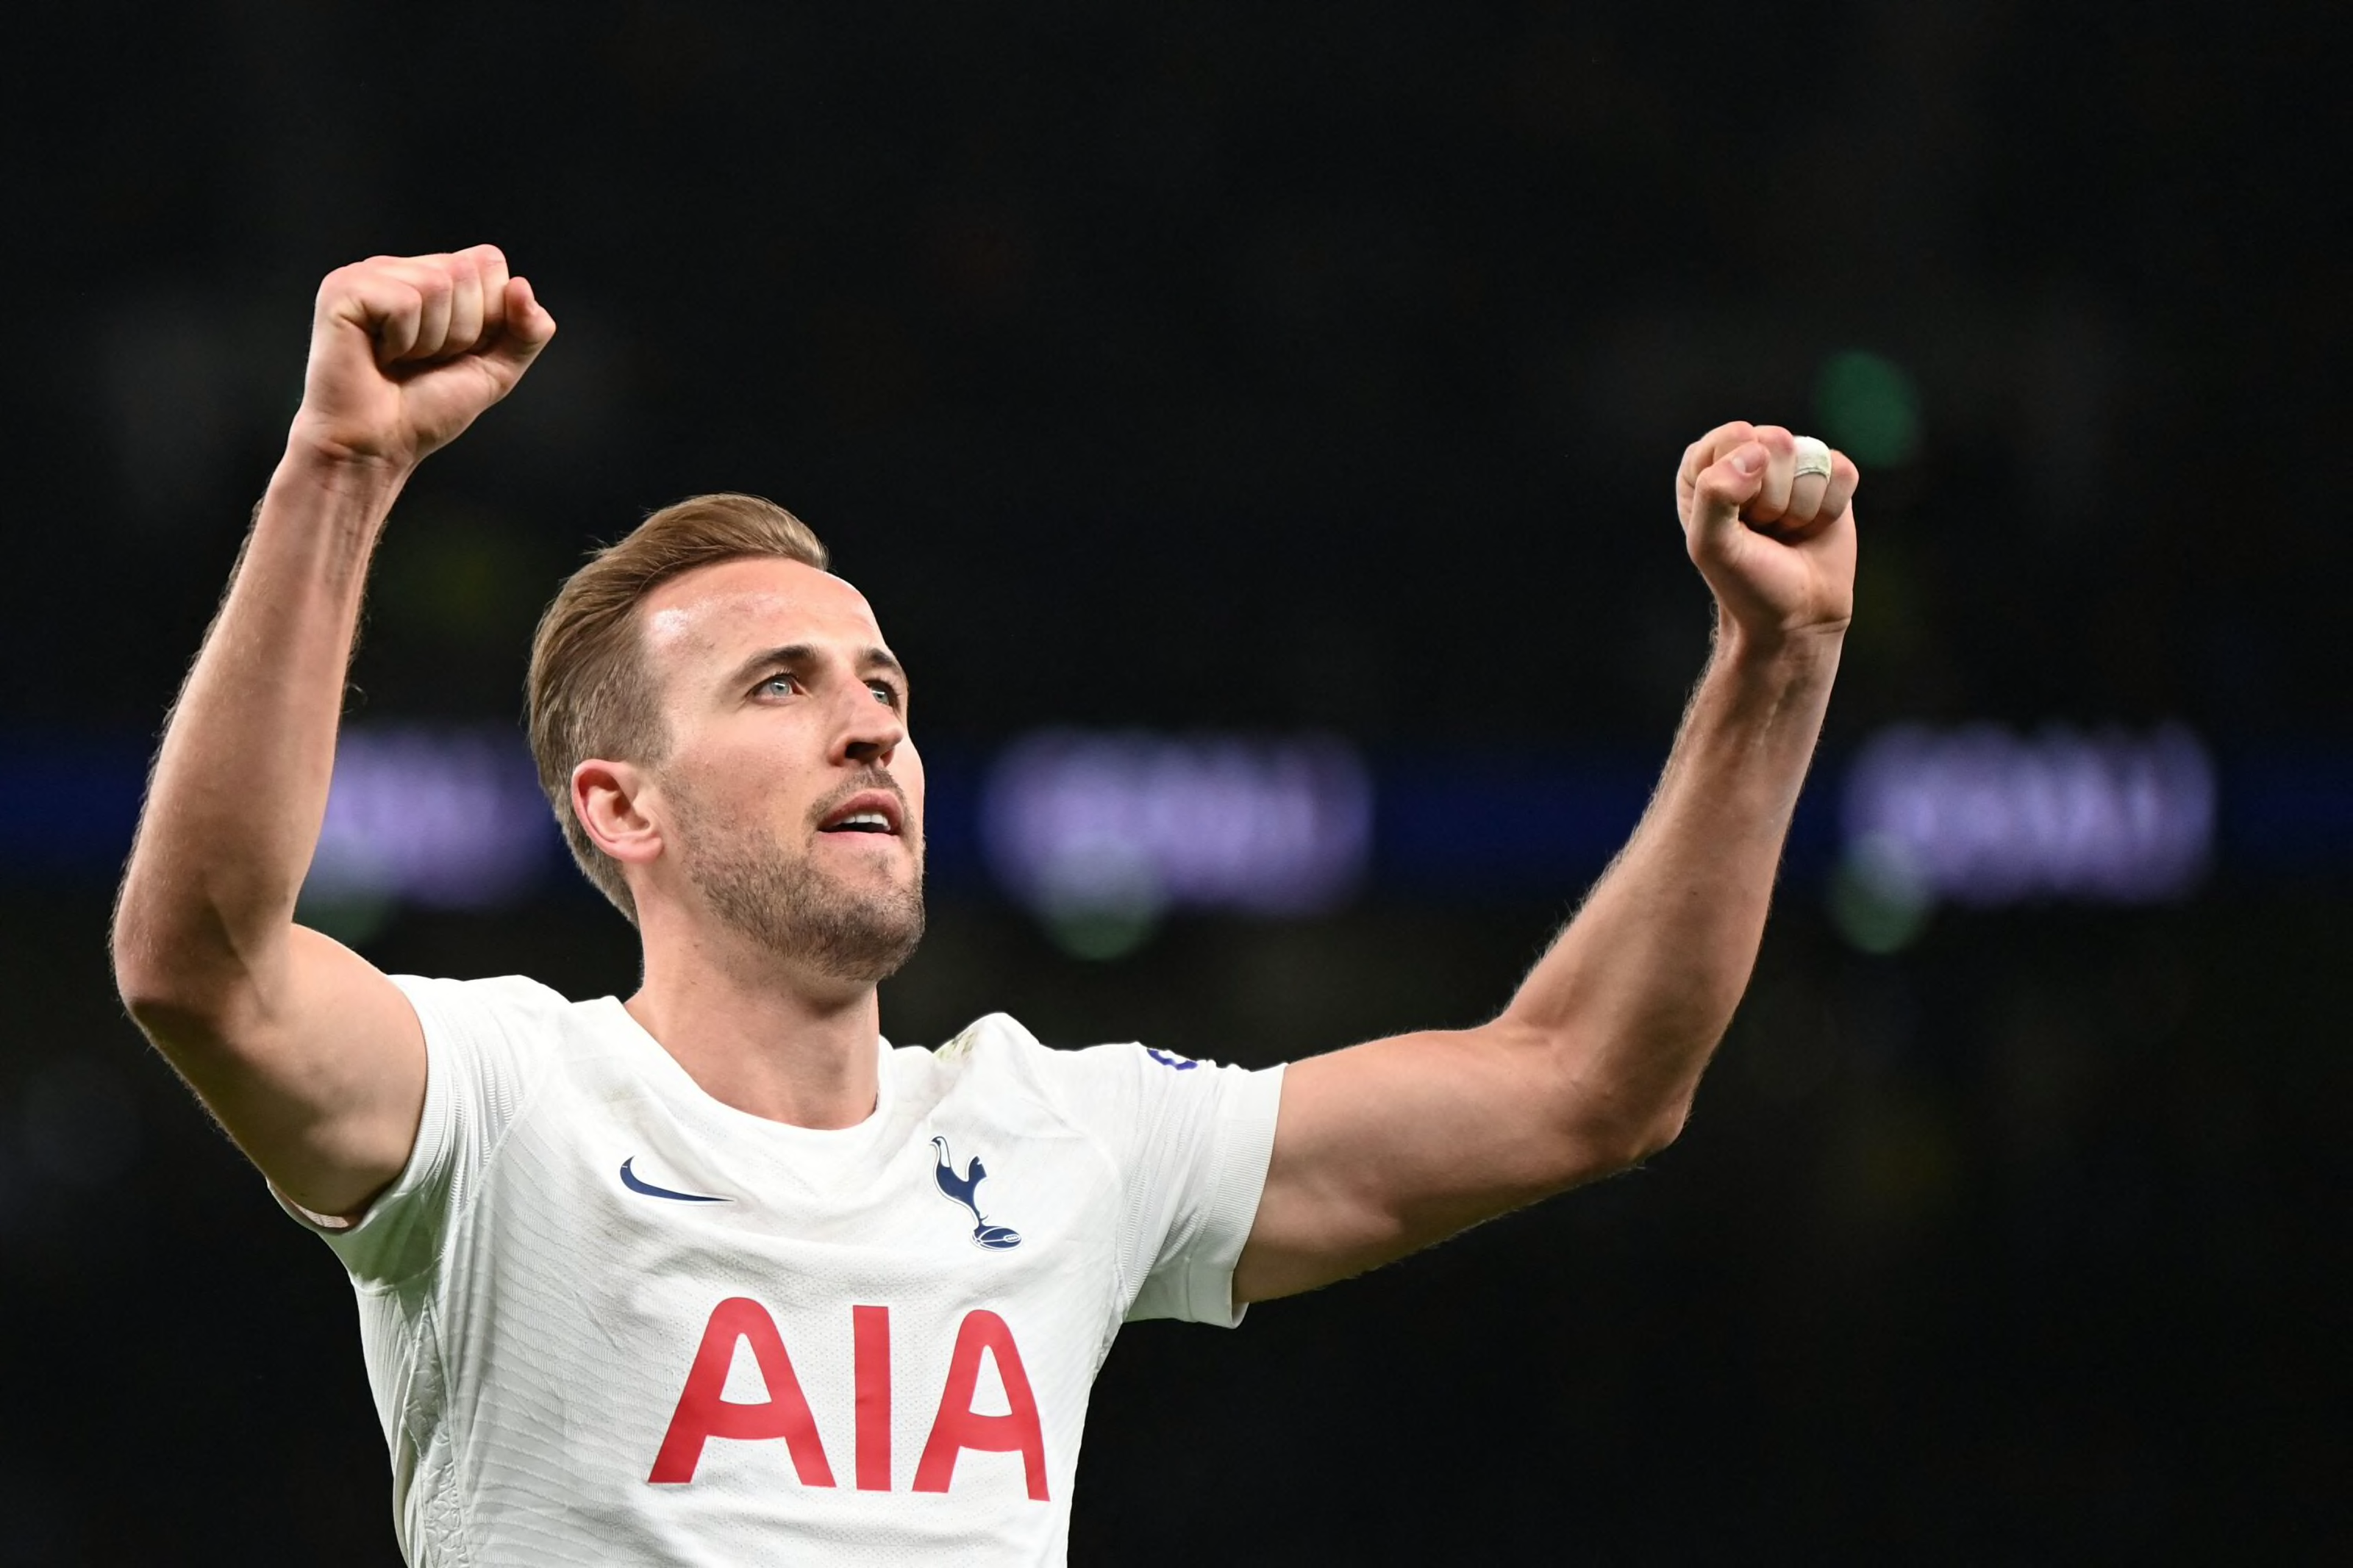 Tottenham Hotspur's English striker Harry Kane celebrates after scoring a goal during the FA Cup third round football match between Tottenham Hotspur and Brighton and Hove Albion at the Tottenham Hotspur Stadium in London, on February 5, 2022. - - (Photo by DANIEL LEAL/AFP via Getty Images)